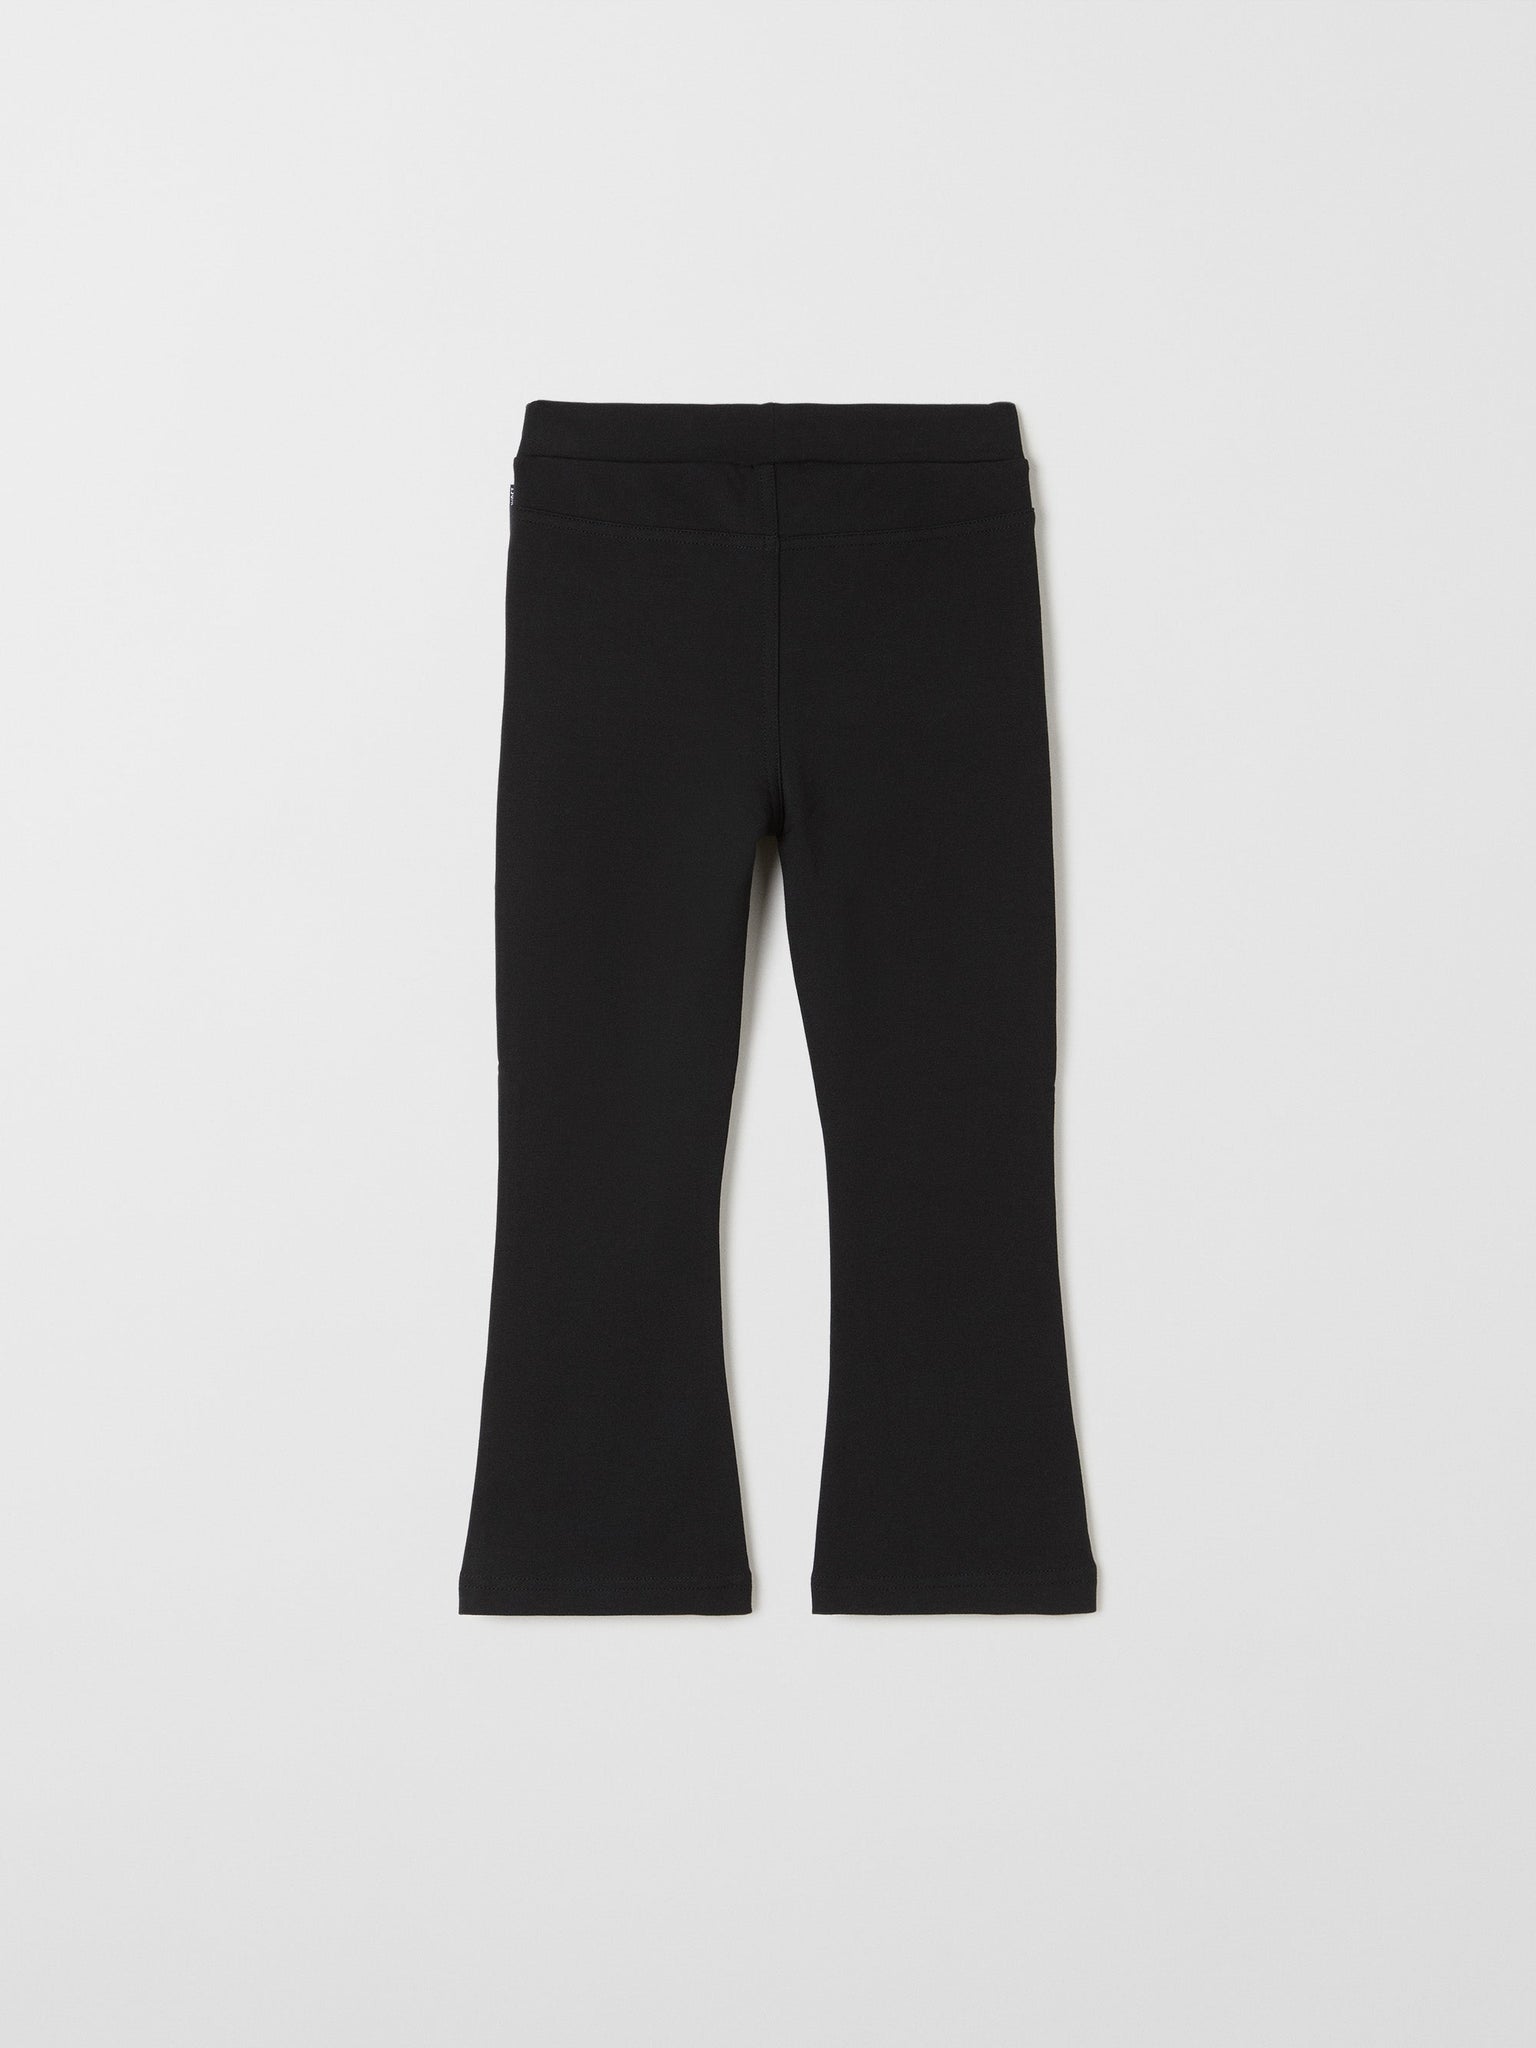 Kids Black Flared Cotton Joggers from the Polarn O. Pyret kids collection. The best ethical kids clothes